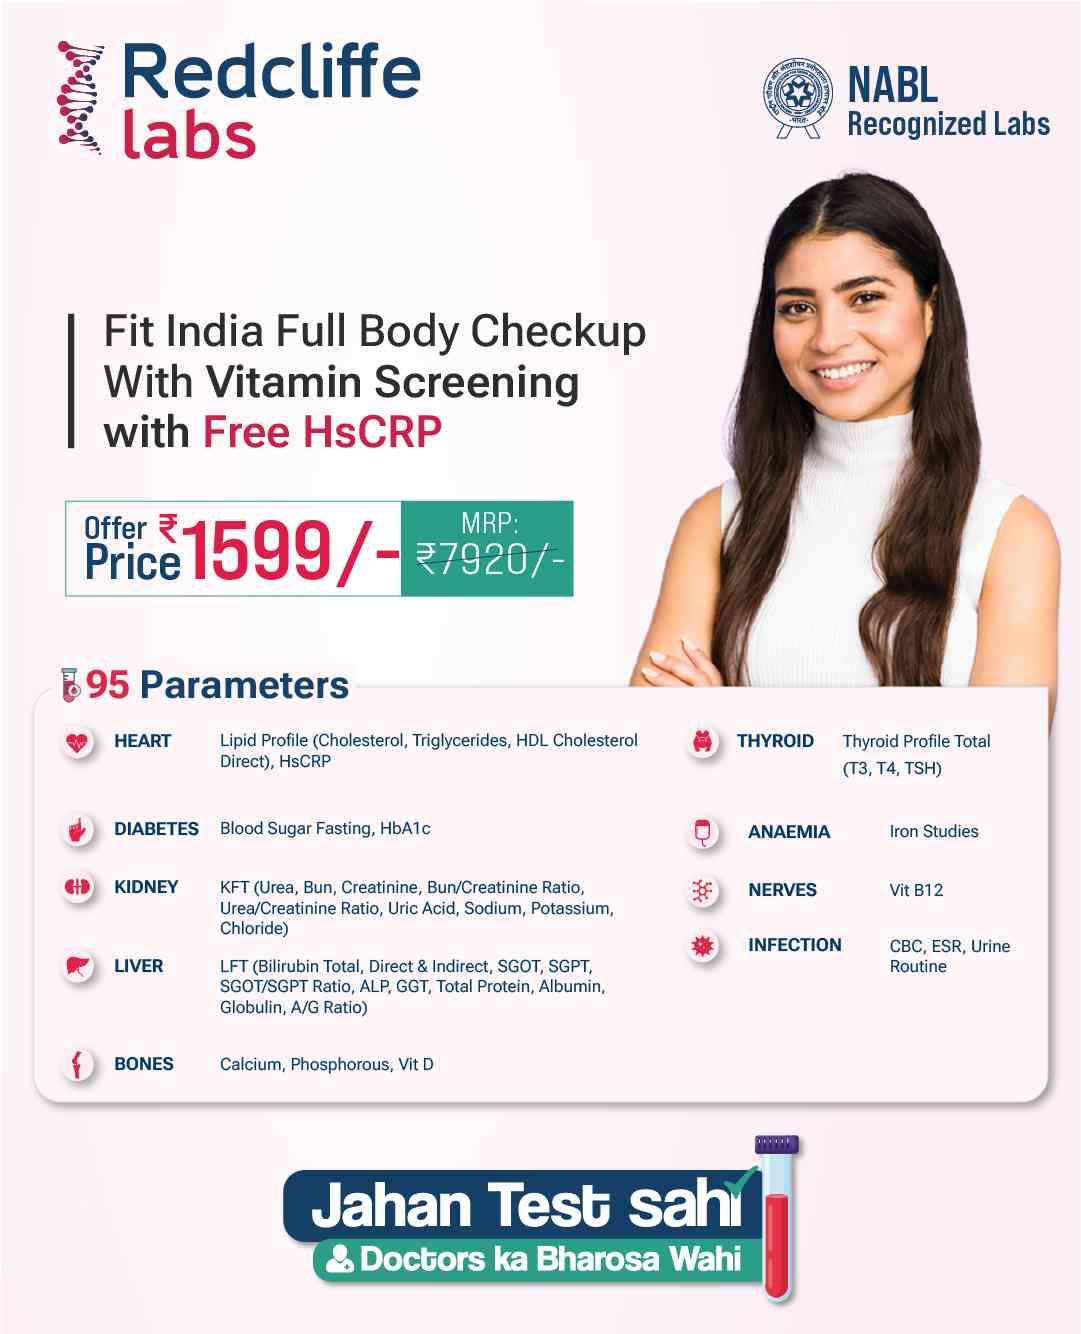 Fit India Full Body Checkup With Vitamin Screening with Free HsCRP